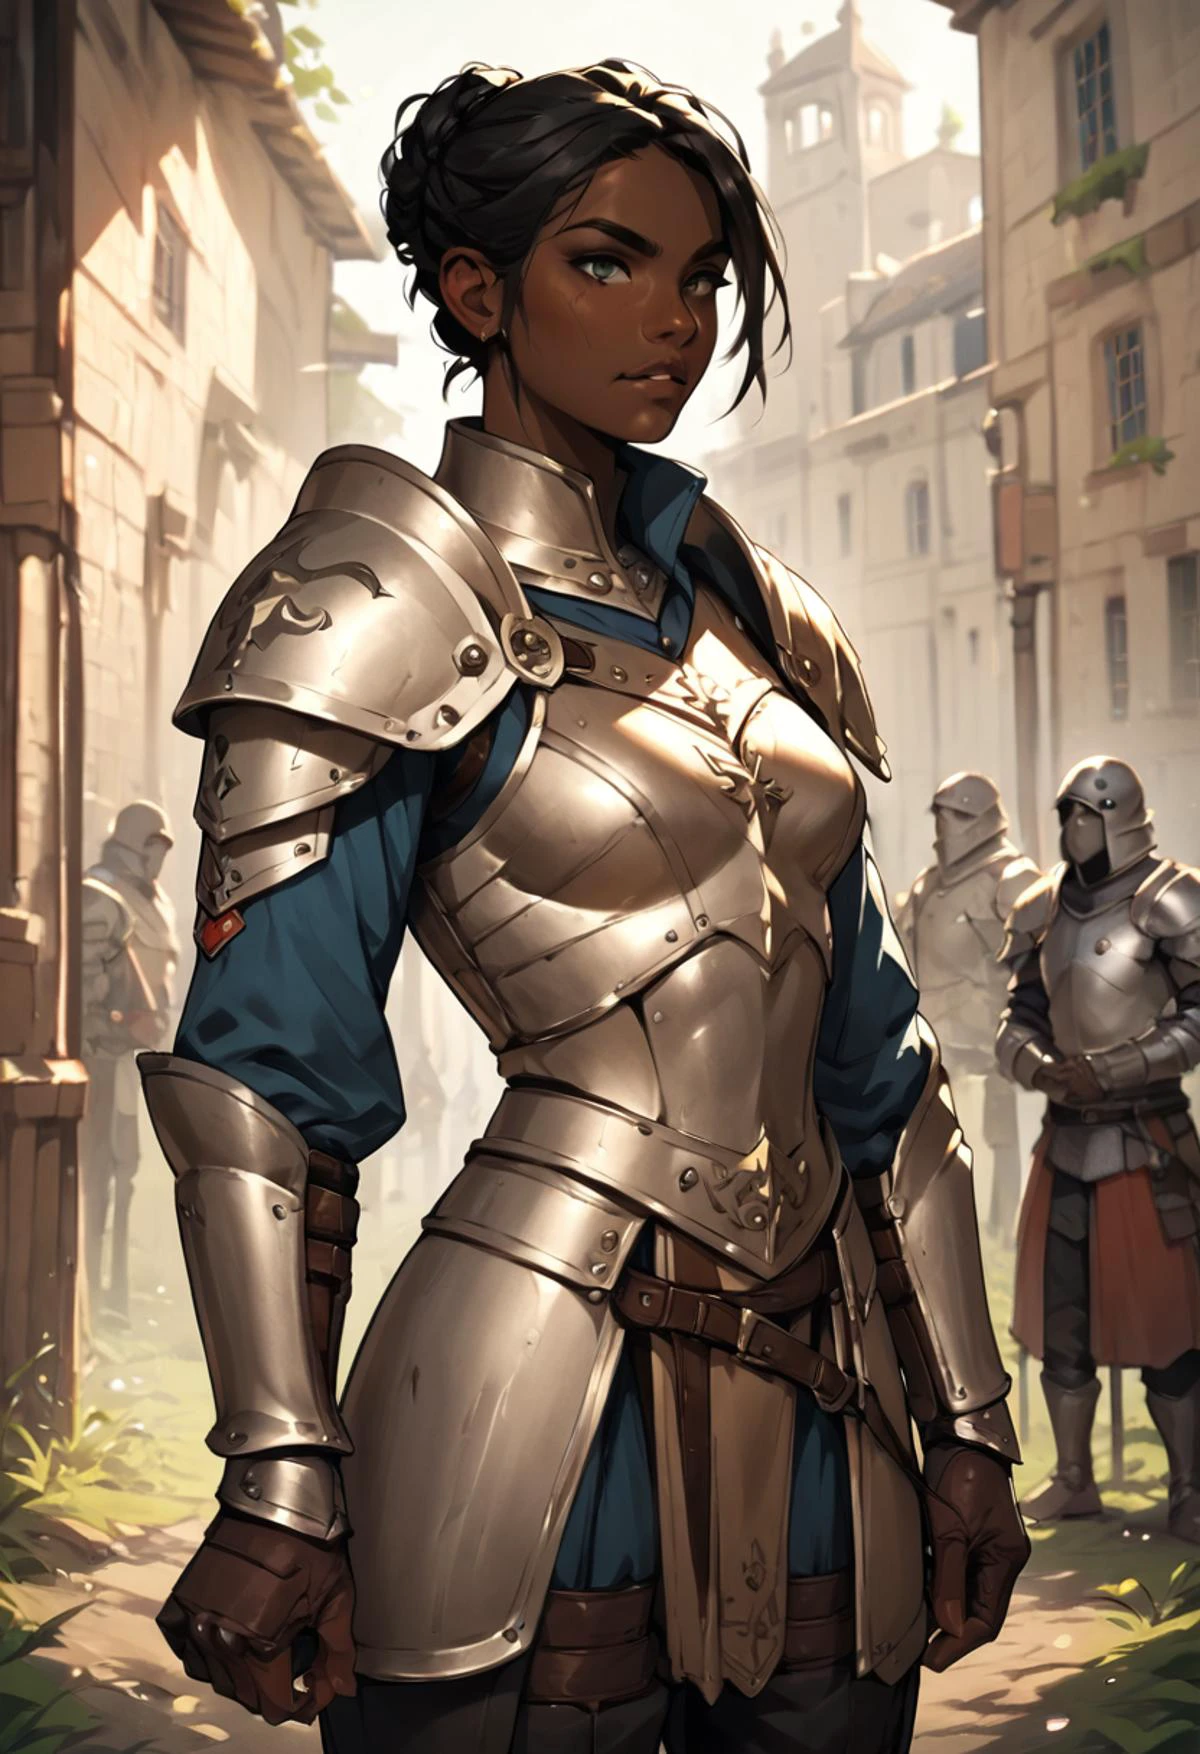 score_9, score_8_up, score_7_up, score_6_up, score_5_up, score_4_up,woman in armor standing in a battlefield,armor,dark skin,medieval,fantasy,solo focus,epic